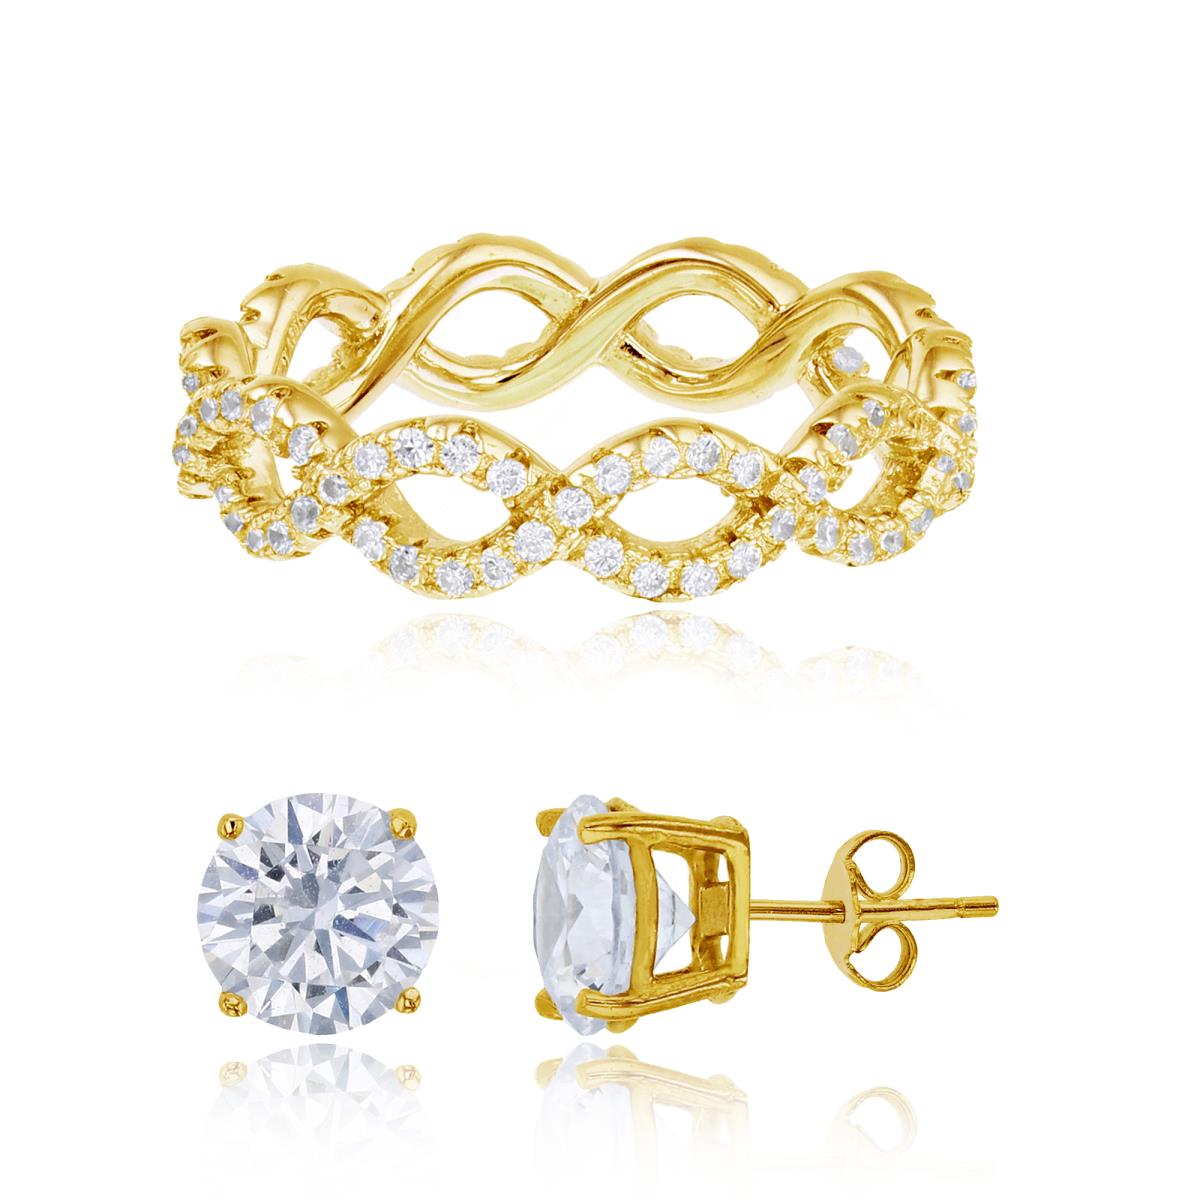 Sterling Silver+1Micron Yellow Gold Infinity Eternity Ring & 8mm AAA Round Solitaire Stud Earring Set